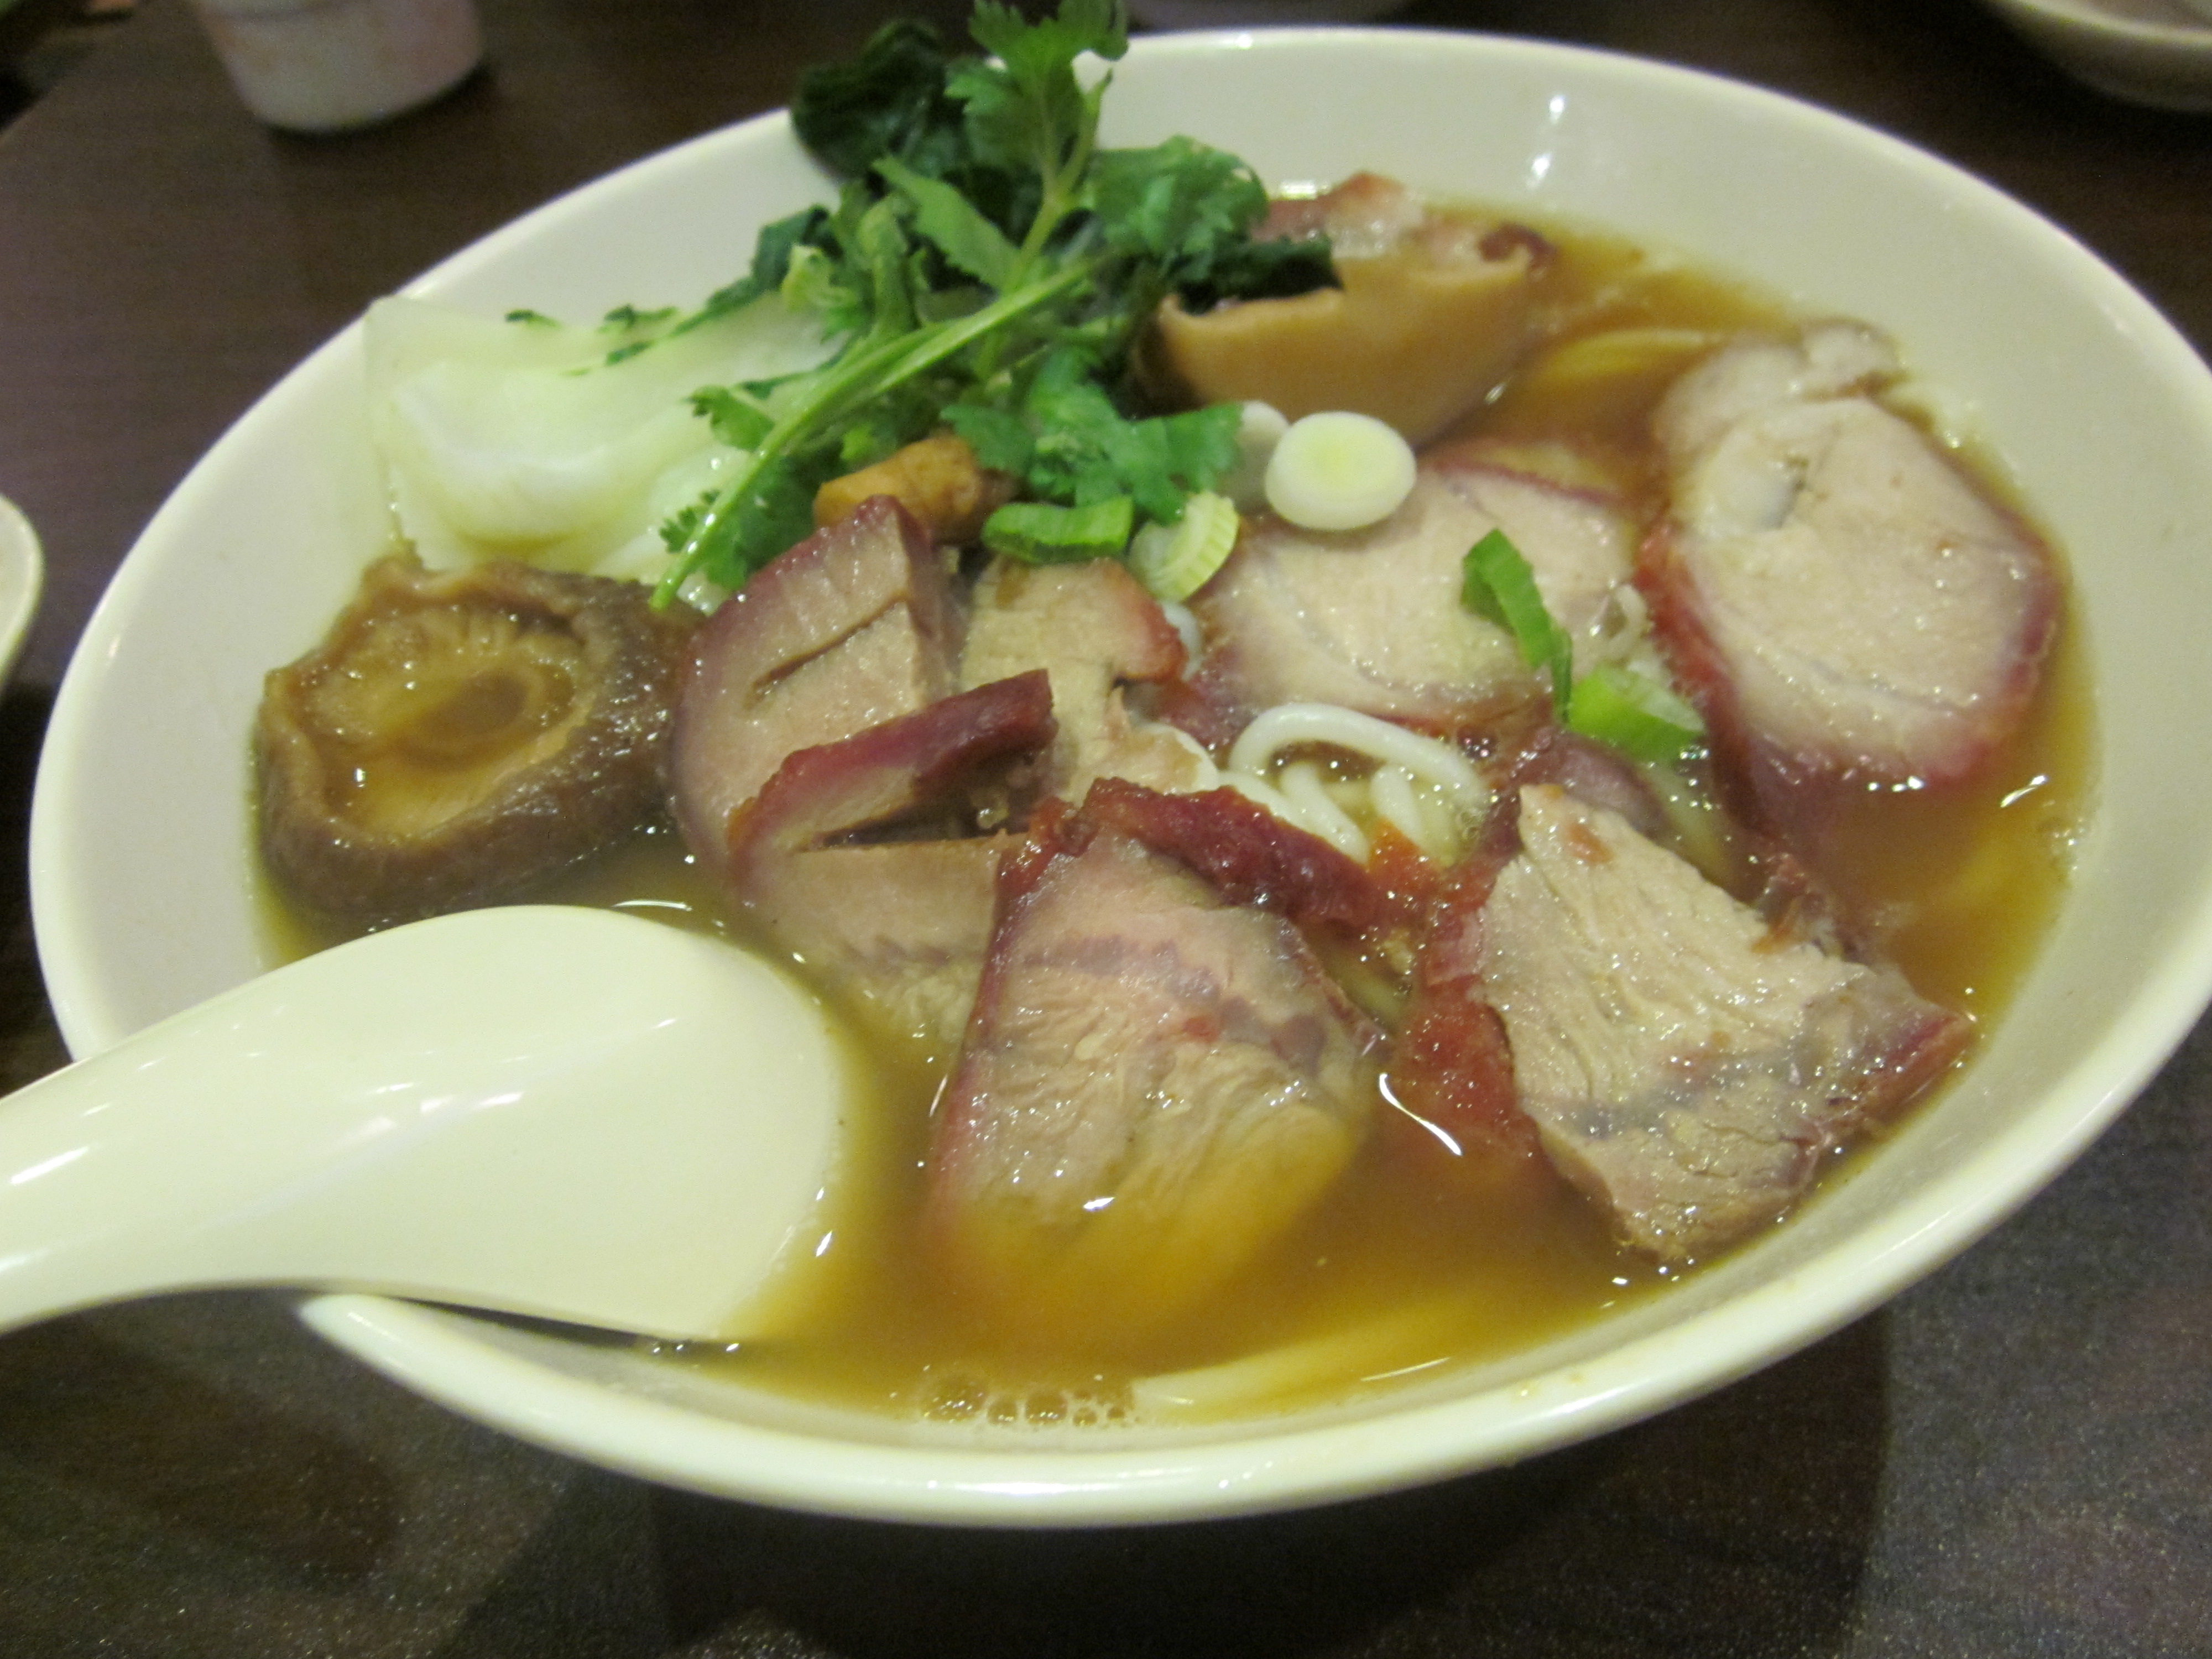 Chinese Beef Stew Noodle Soup